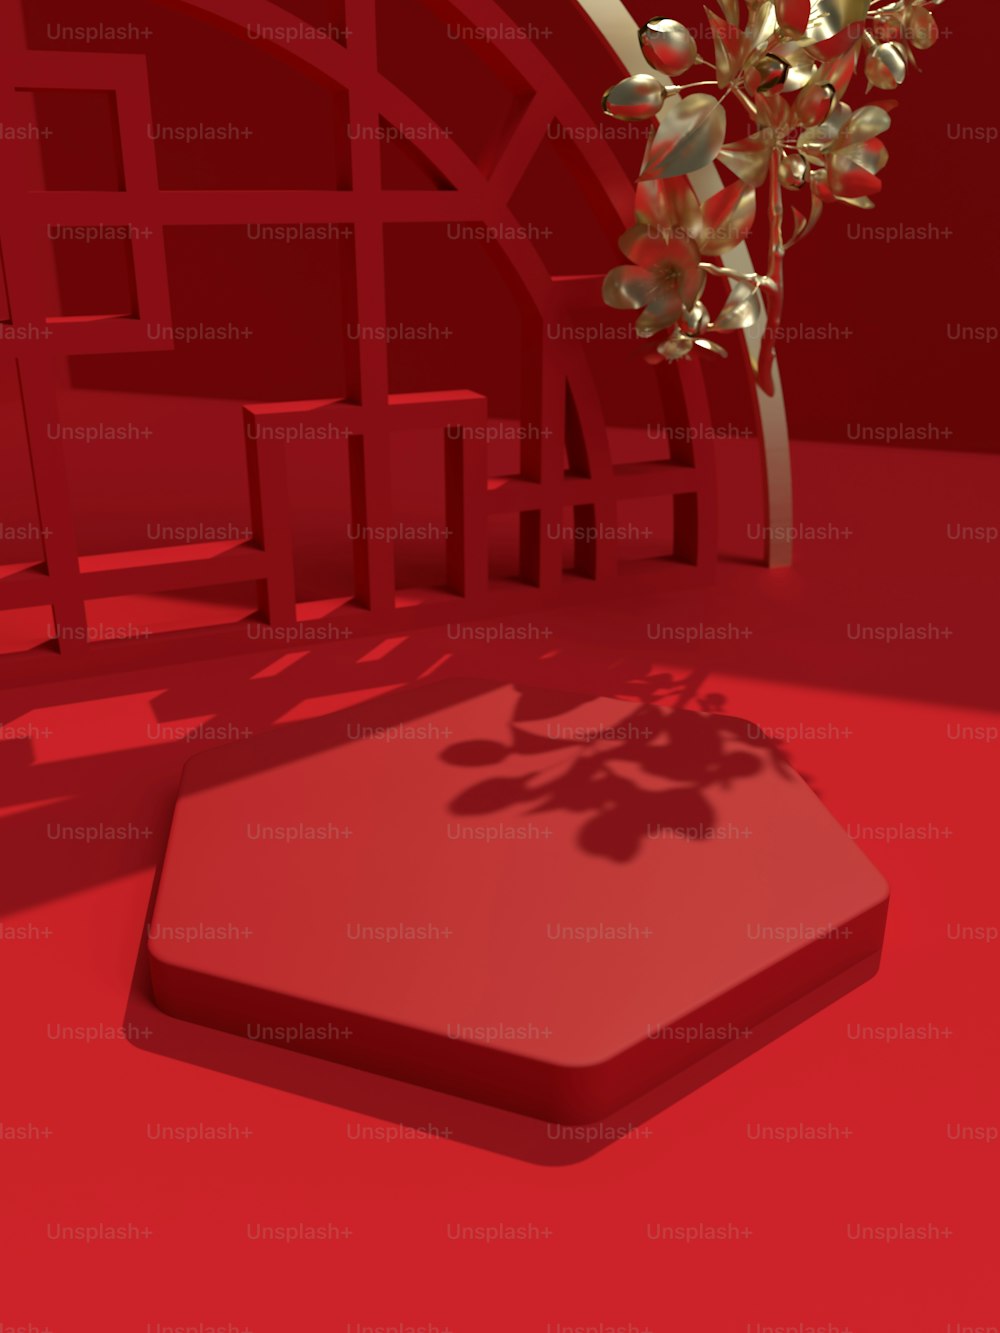 a 3d image of a tree in a red room